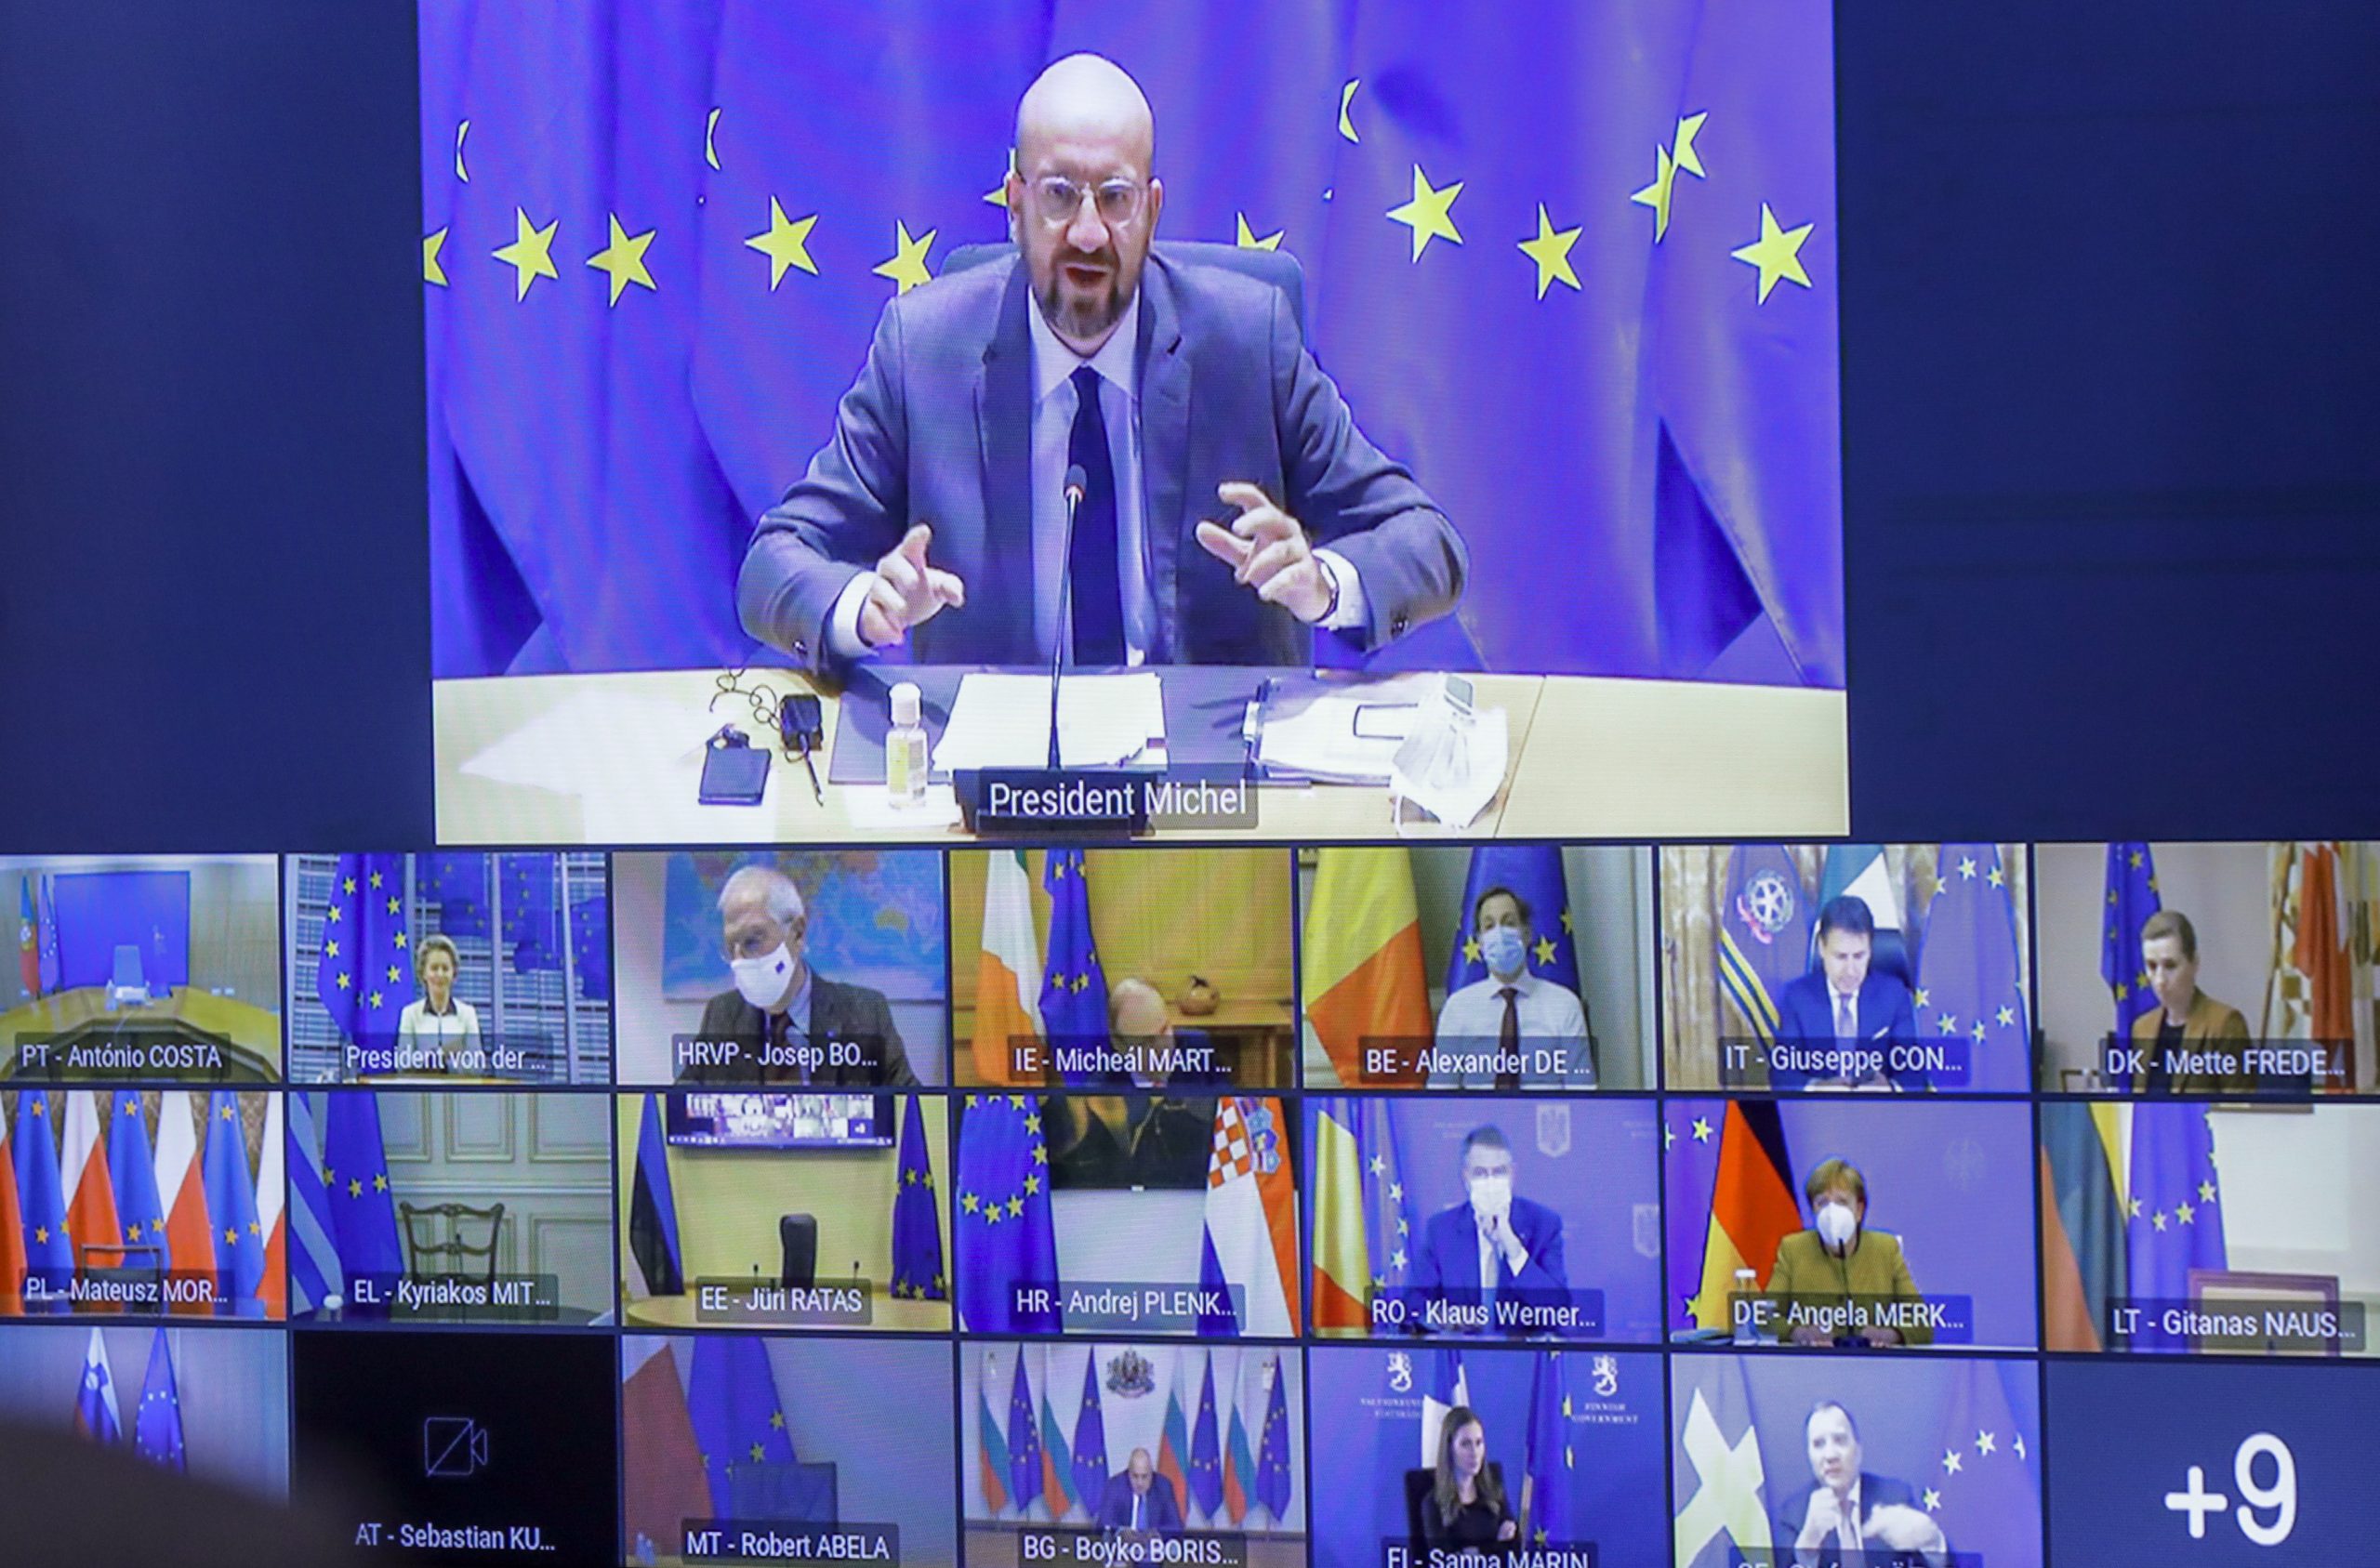 epa08956099 European Council President Charles Michel chairs a video conference of the members of the European Council on Covid-19, in Brussels, Belgium, 21 January 2021. The EU leaders will discuss coordination on the response to the COVID-19 pandemic, including the large-scale roll-out of vaccines and the deployment of all available instruments to limit the spread of the virus.  EPA/OLIVIER HOSLET / POOL